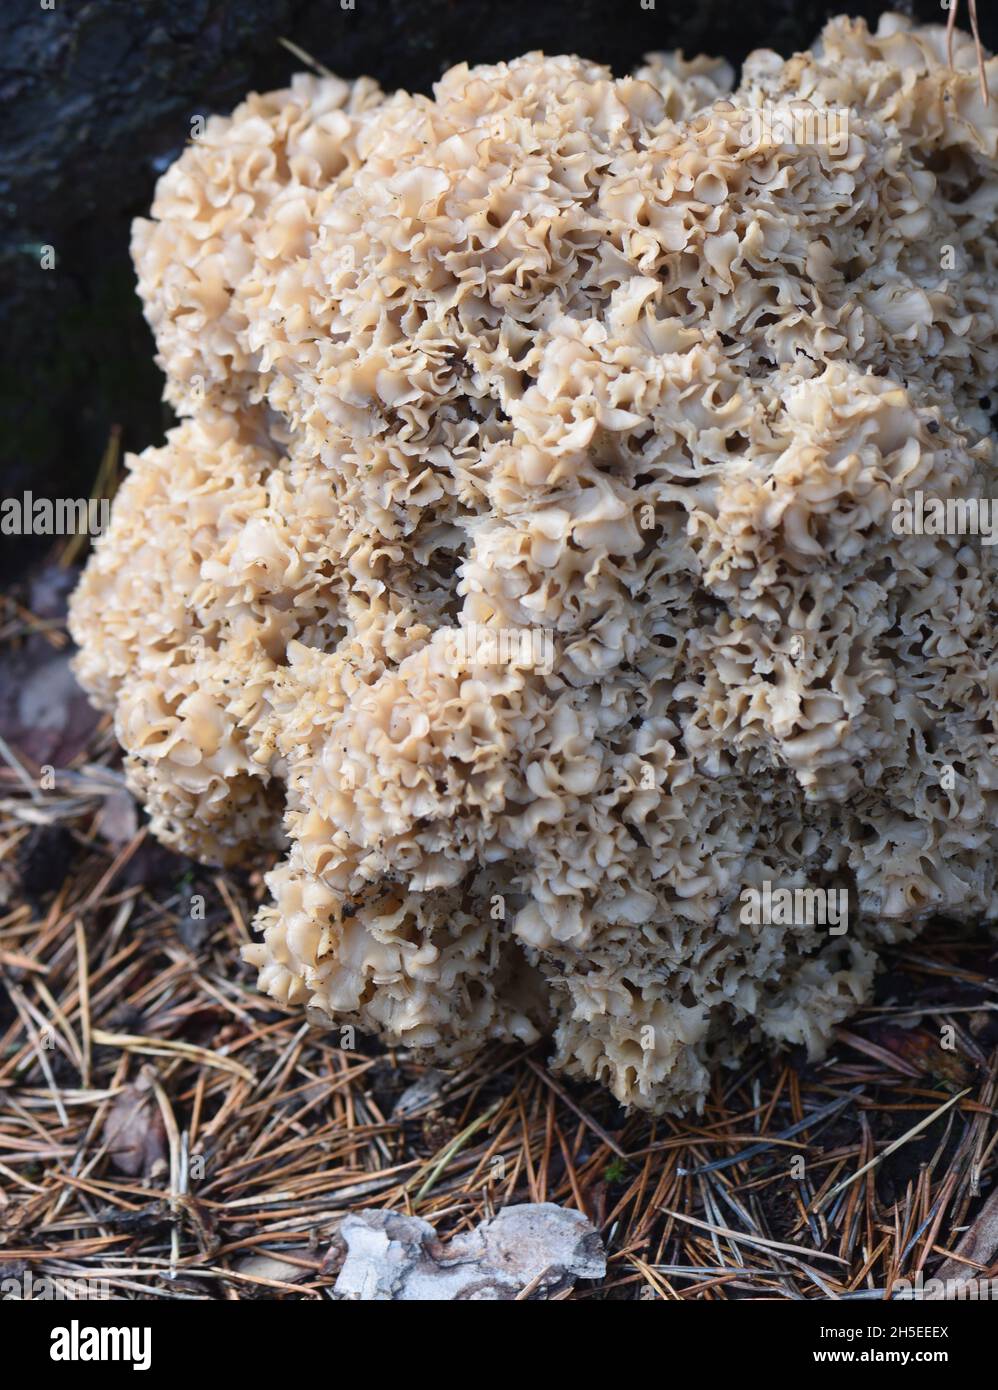 A cauliflower fungus (Sparassis crispa) grows at the base of a pine tree. Bedgebury Forest, Kent, UK. Stock Photo